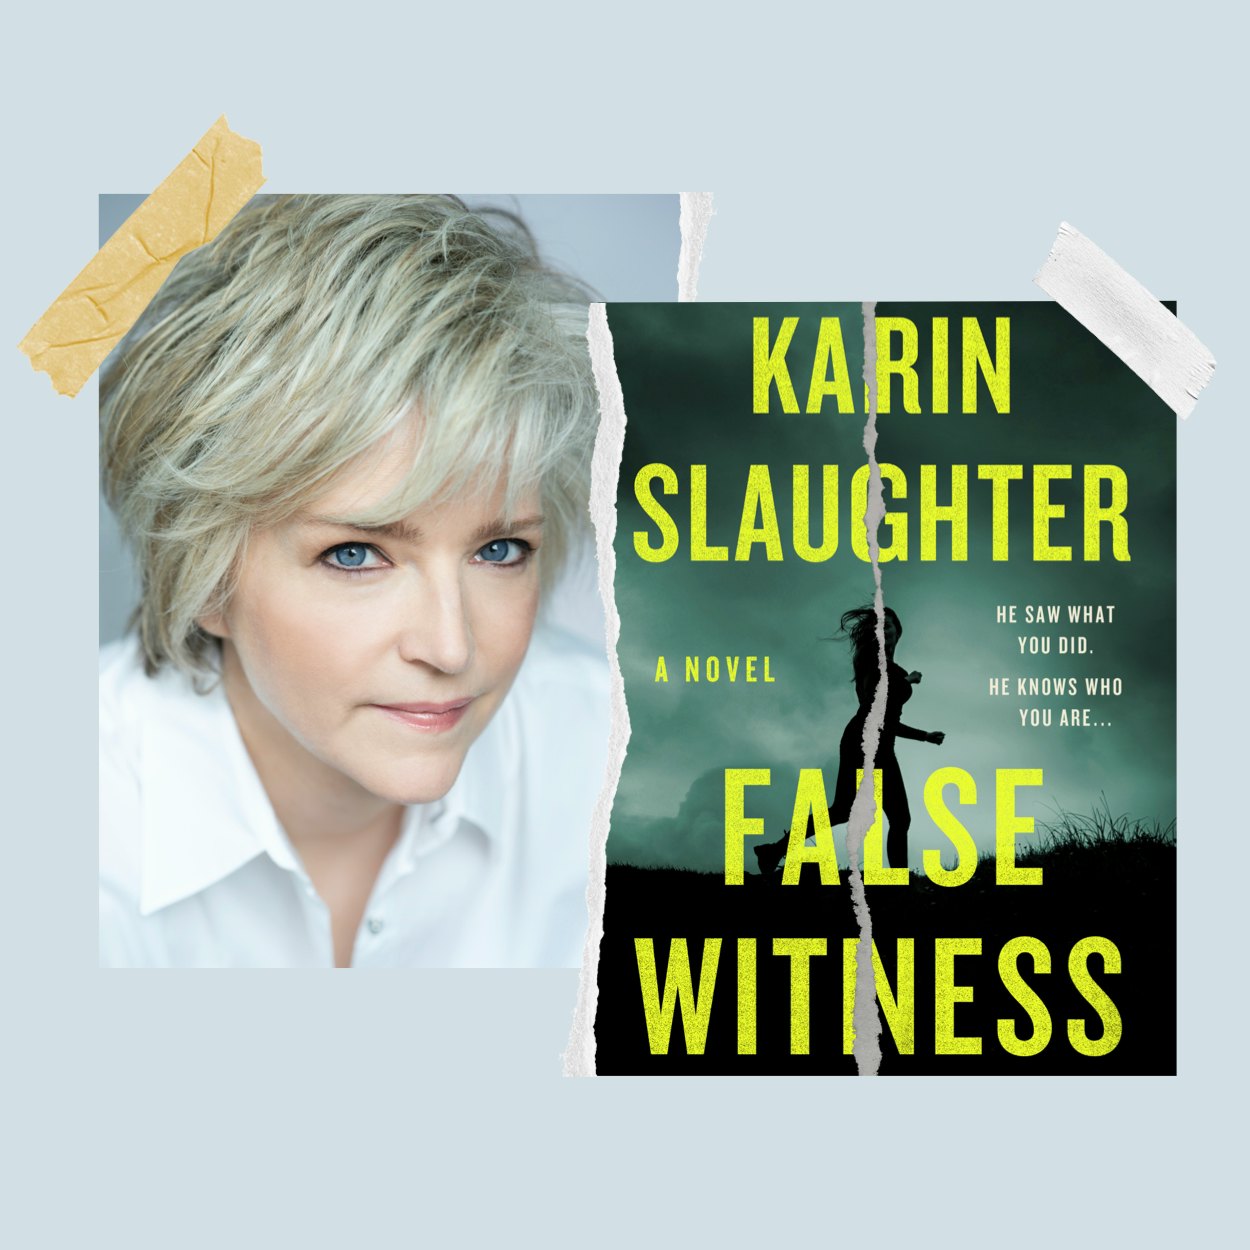 Lynda Leigh Blowjob - Karin Slaughter's 'False Witness': Read Chapters 2 & 3 In This Excerpt